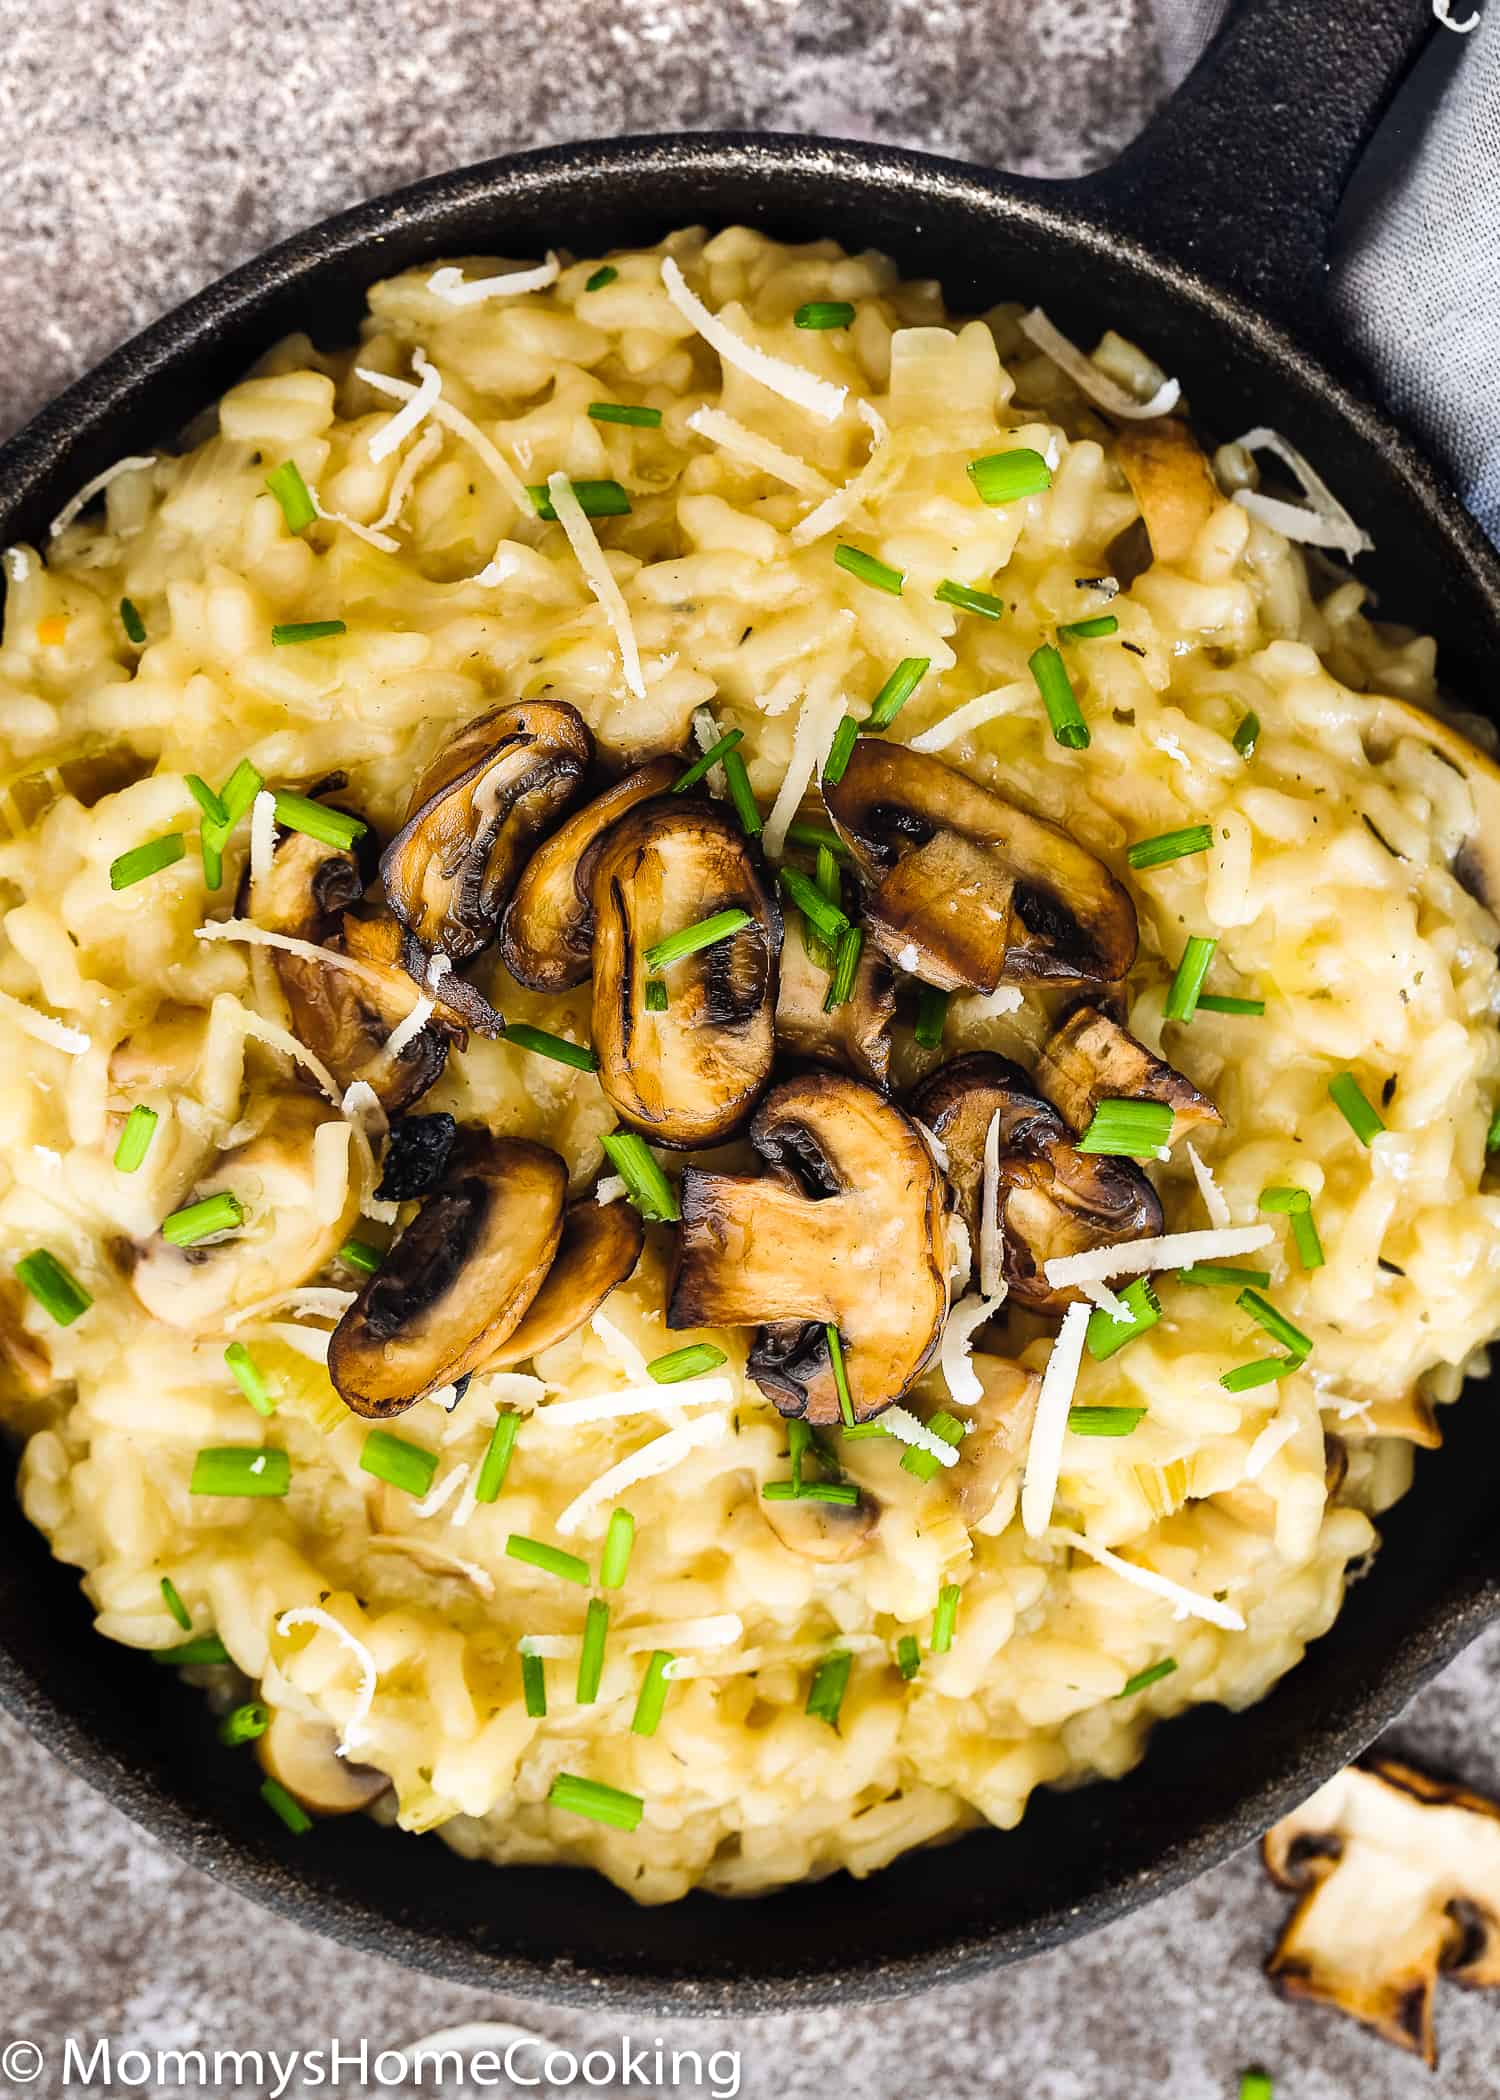 This Easy Pressure Cooker Mushroom Risotto recipe is quick, easy and hassle-free. Perfectly creamy and silky, this rice can be served as a luscious side or unique main dish. https://mommyshomecooking.com